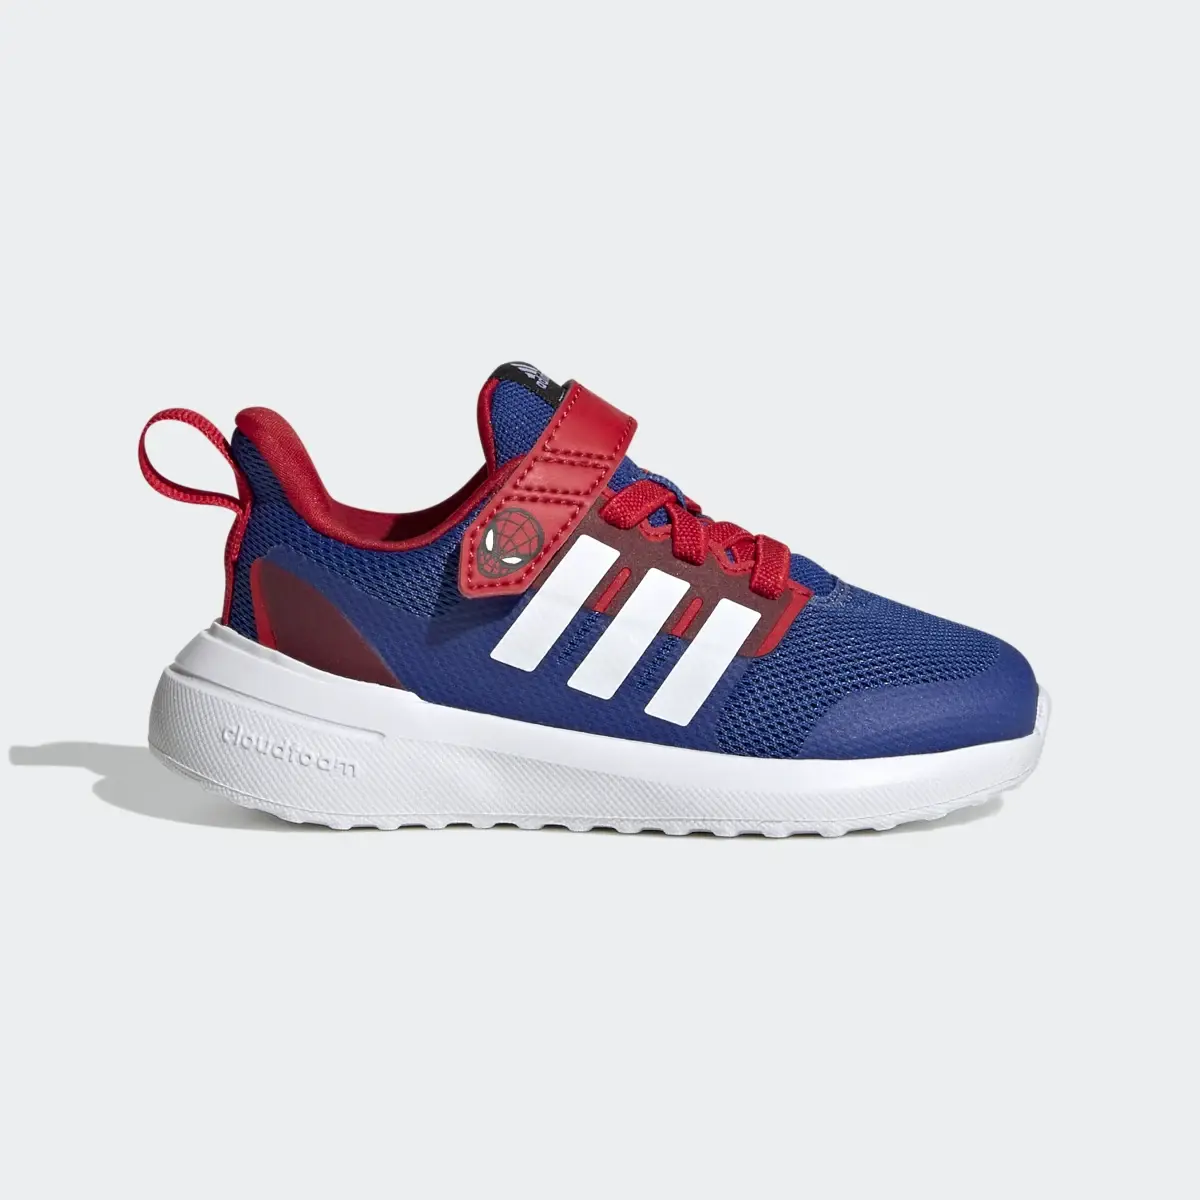 Adidas x Marvel FortaRun 2.0 Spider-Man Cloudfoam Elastic Lace Top Strap Shoes. 2